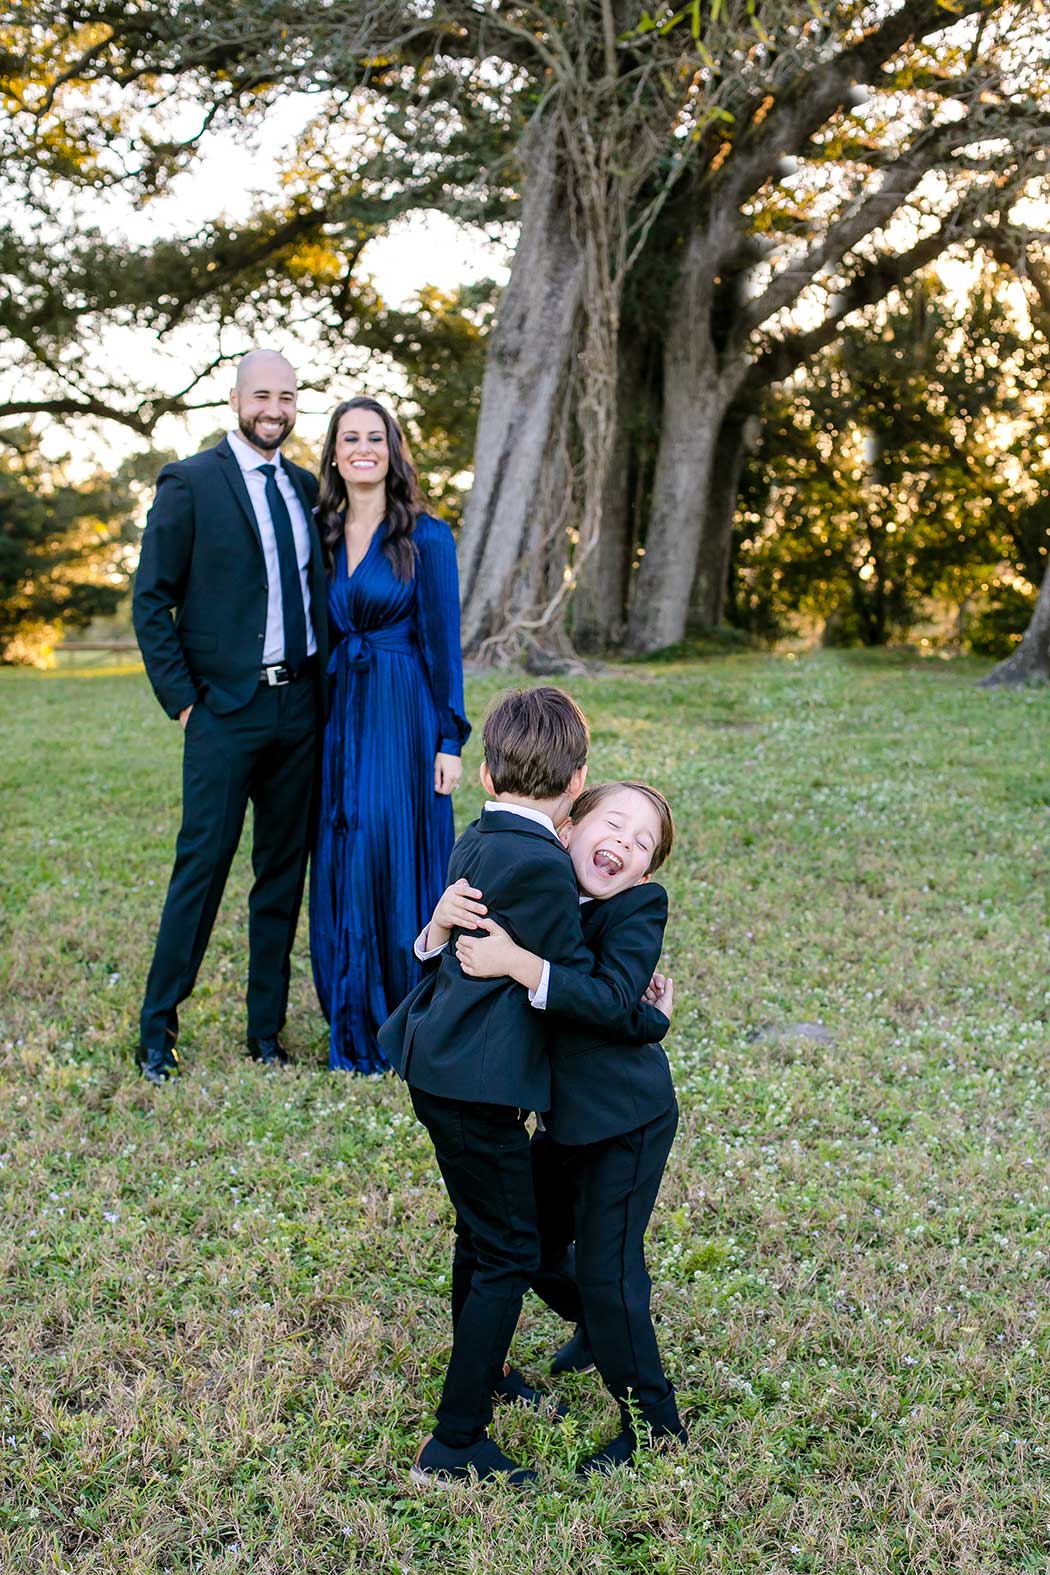 fun family pictures | fun pose for elegrant family photographs | robbins preserve family photography | family photographer south florida